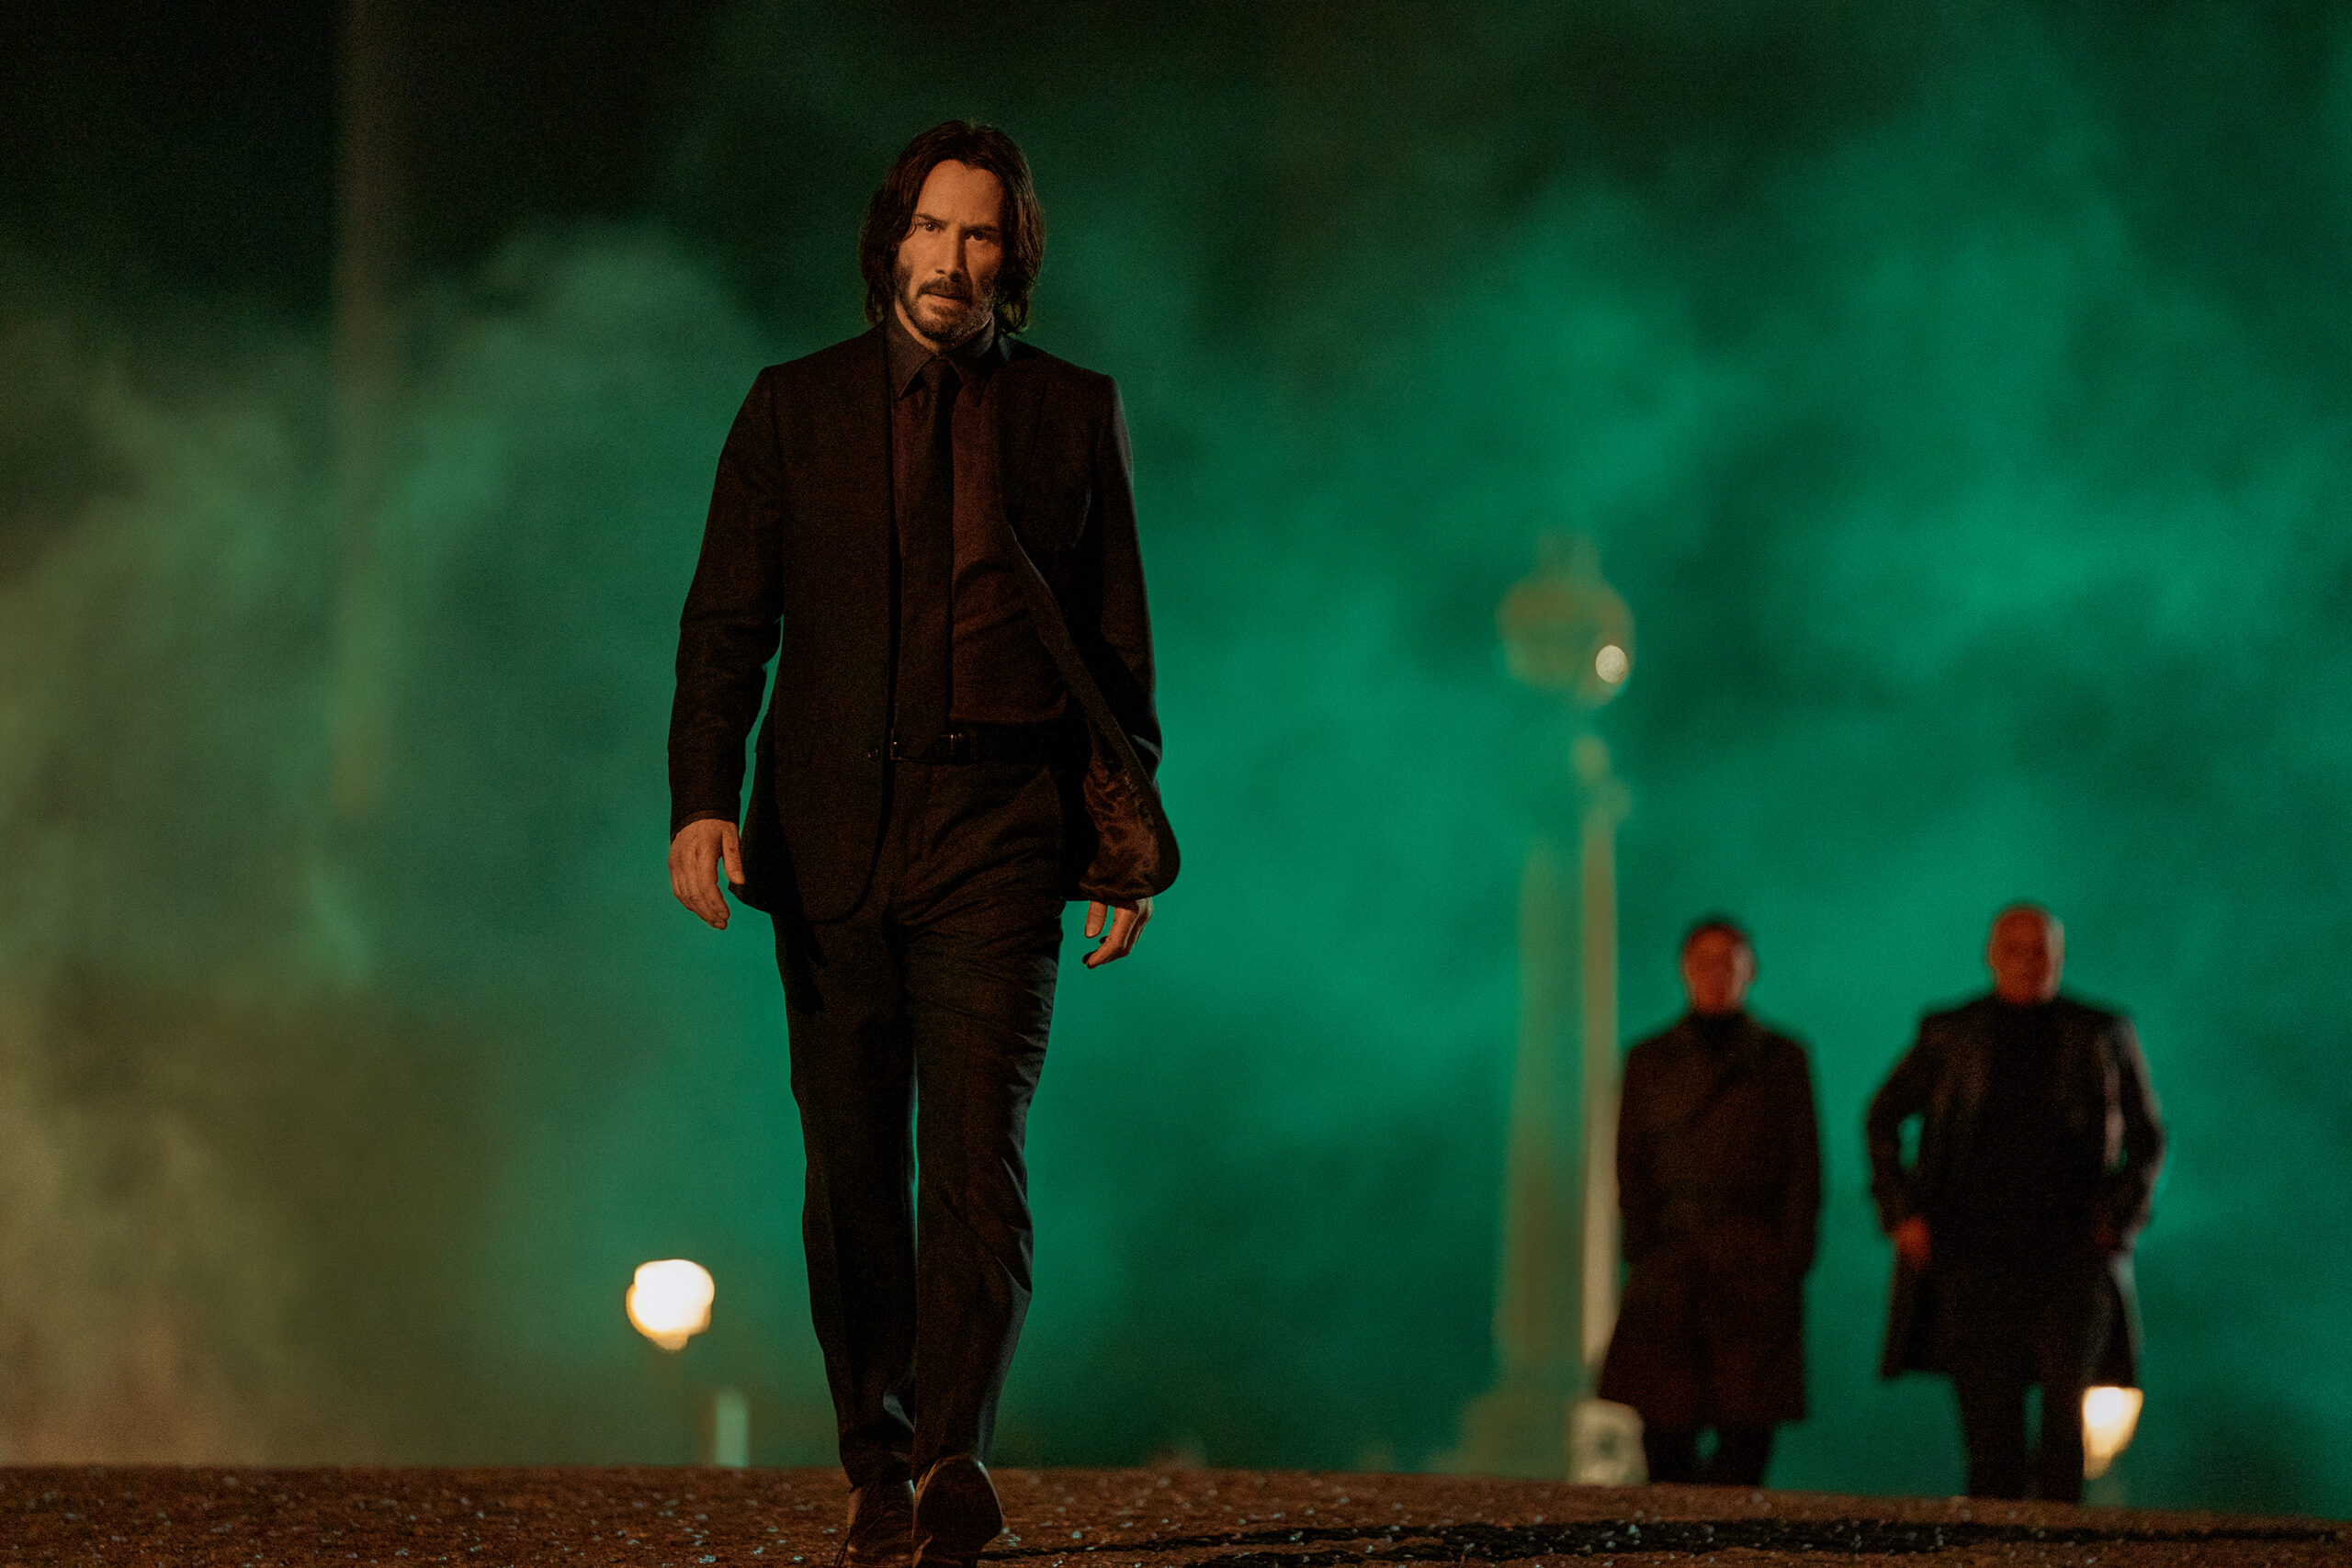 Keanu Reeves as John Wick in "John Wick: Chapter 4." Reeves recently stated that contrary to rumors, he is, in fact, mortal. "Yeah, man, I age," he said. "It's happening, man." (Murray Close/Lionsgate/TNS)